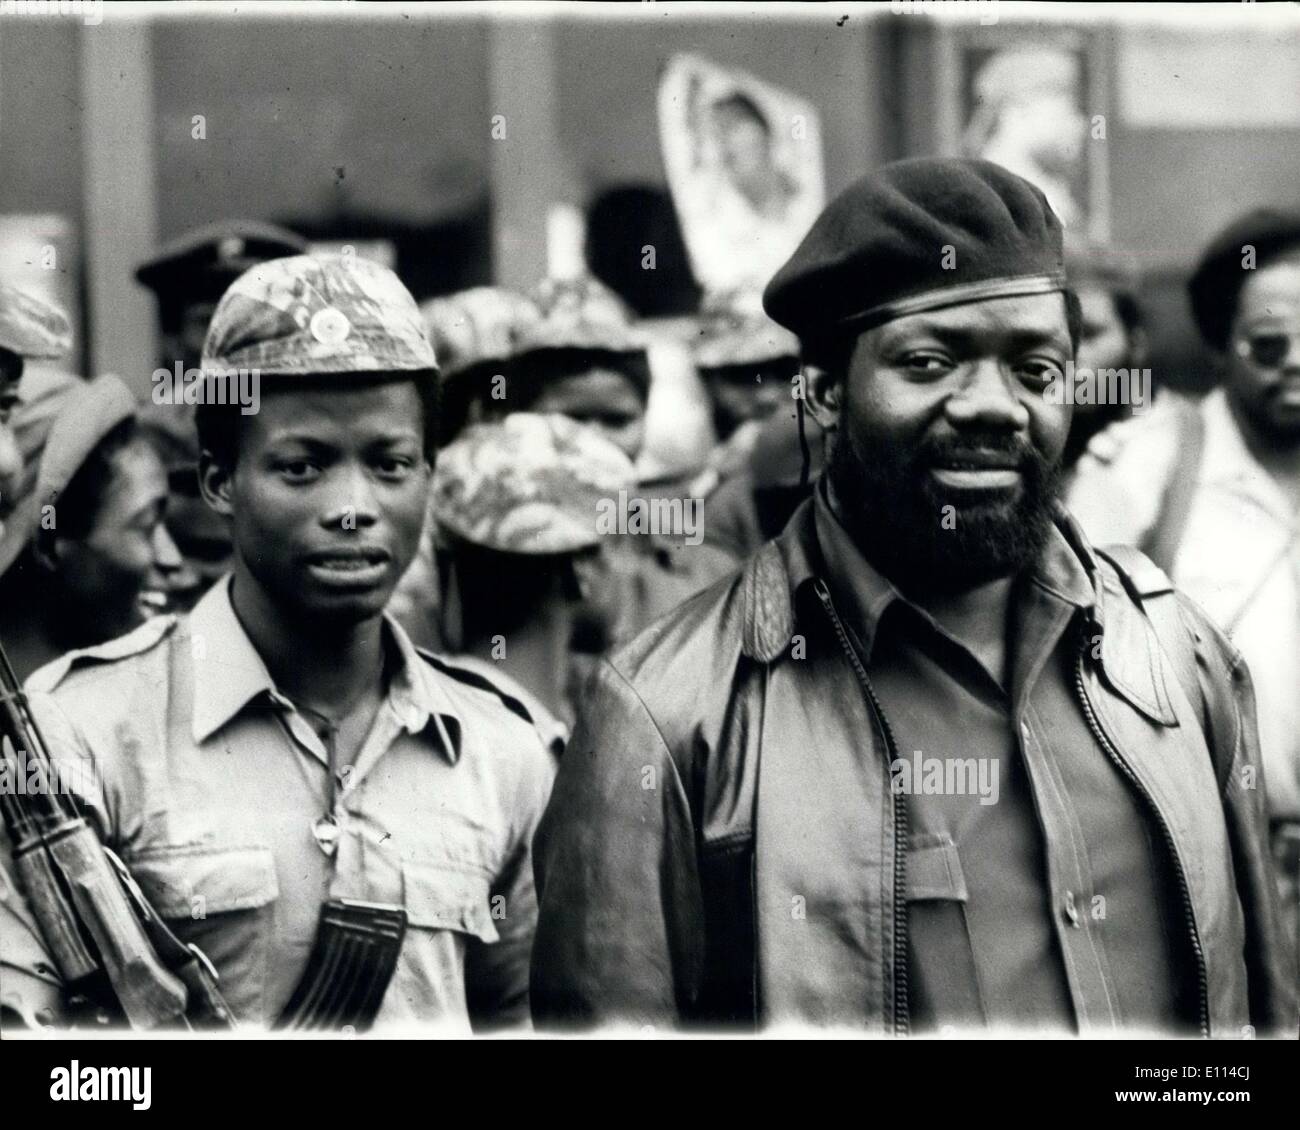 Nov. 07, 1975 - The Fighting Intensifies in Angola: The struggle for control of Angola intensifies as Independence Day, November 11th, approaches, despite reports from Kampala on Ugande radio of an agreement to form a tripartite government, In the South of the country the combined forces of UNITA and the F.N.L.A. continue to put intense military pressure on the M.P.L.A. Photo shows Dr. Jonas Savimbi,of UNITA and his Political Secretary, Ernesto Mufato, reading in intercepted M.P.L.A. message to evacuate Lobito. Stock Photo